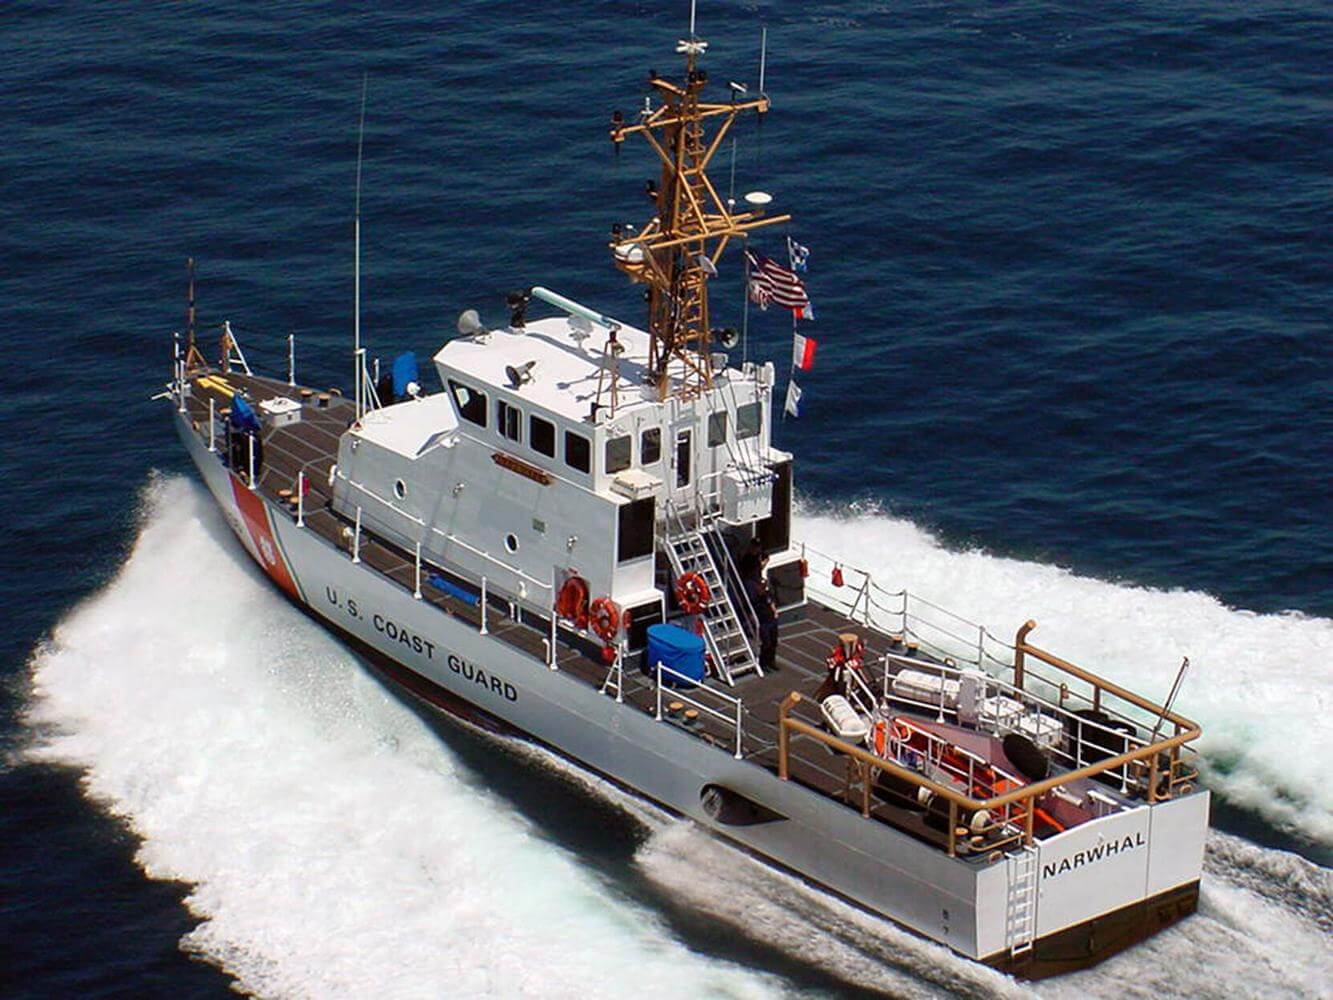 Free Tours of US Coast Guard Narwhal Ship